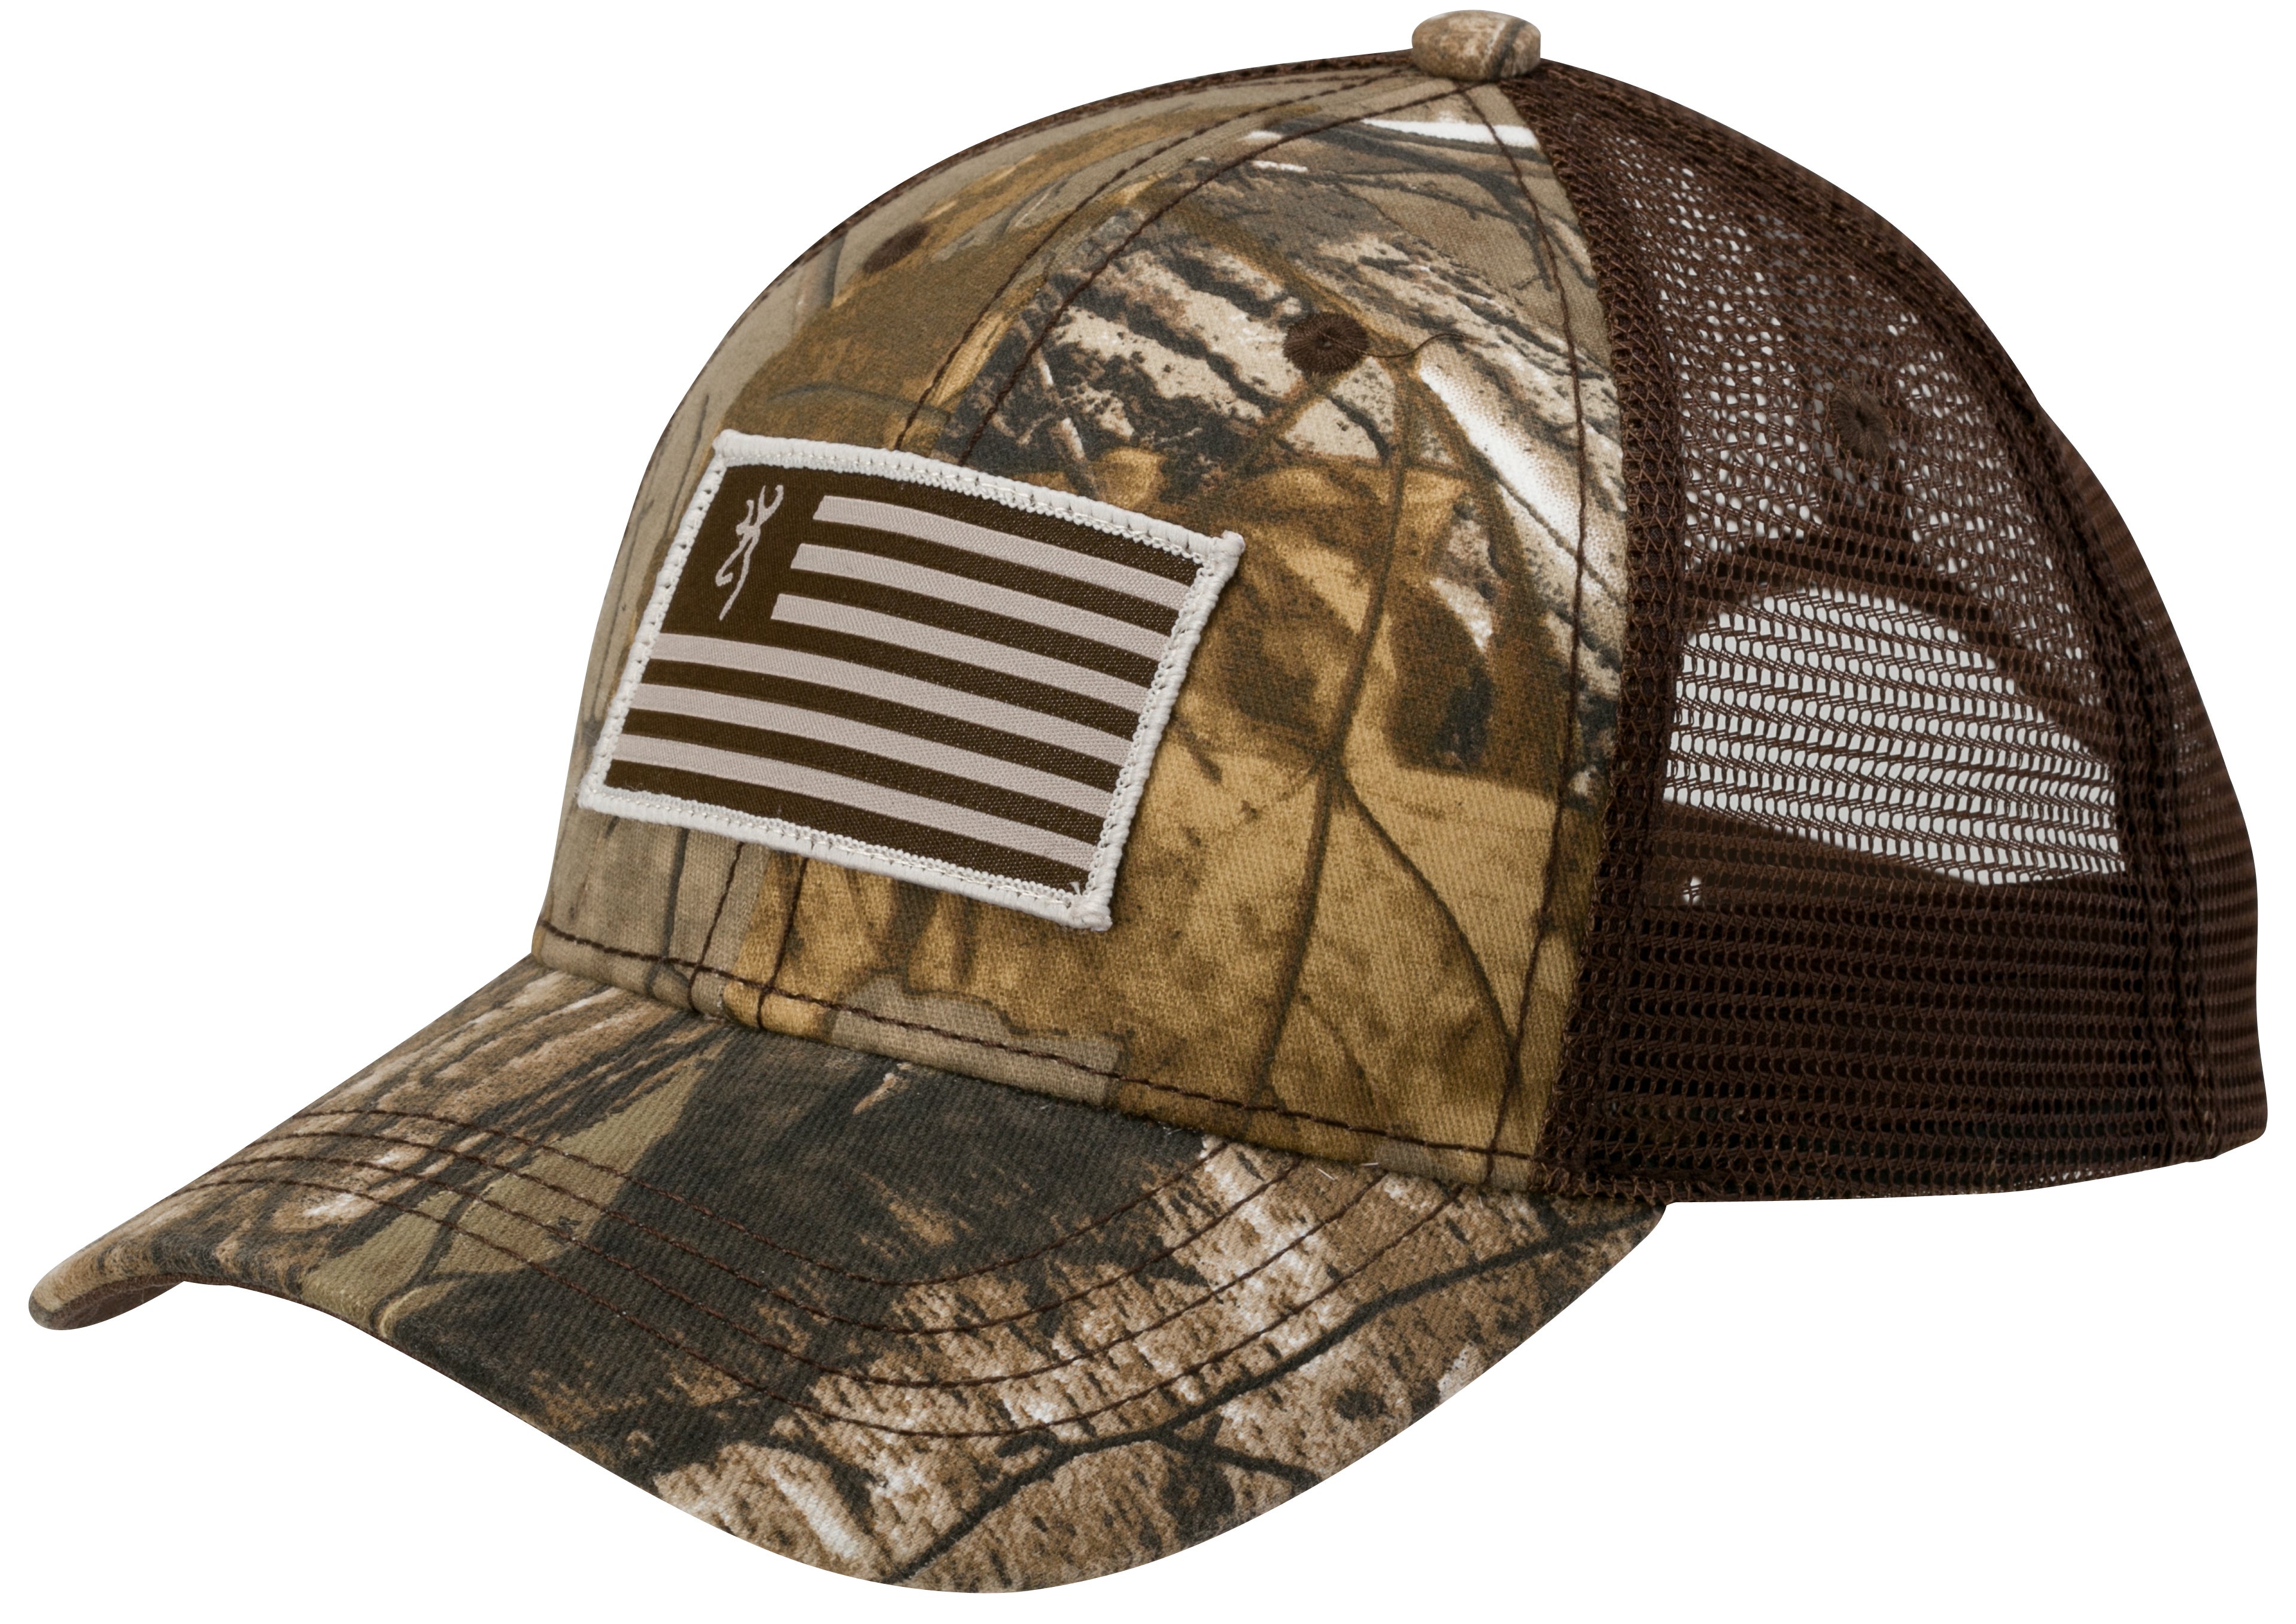 https://www.browning.com/content/dam/browning/product/clothing/caps/2017/patriot-cap/Browning-Patriot-Cap-308176881.jpg